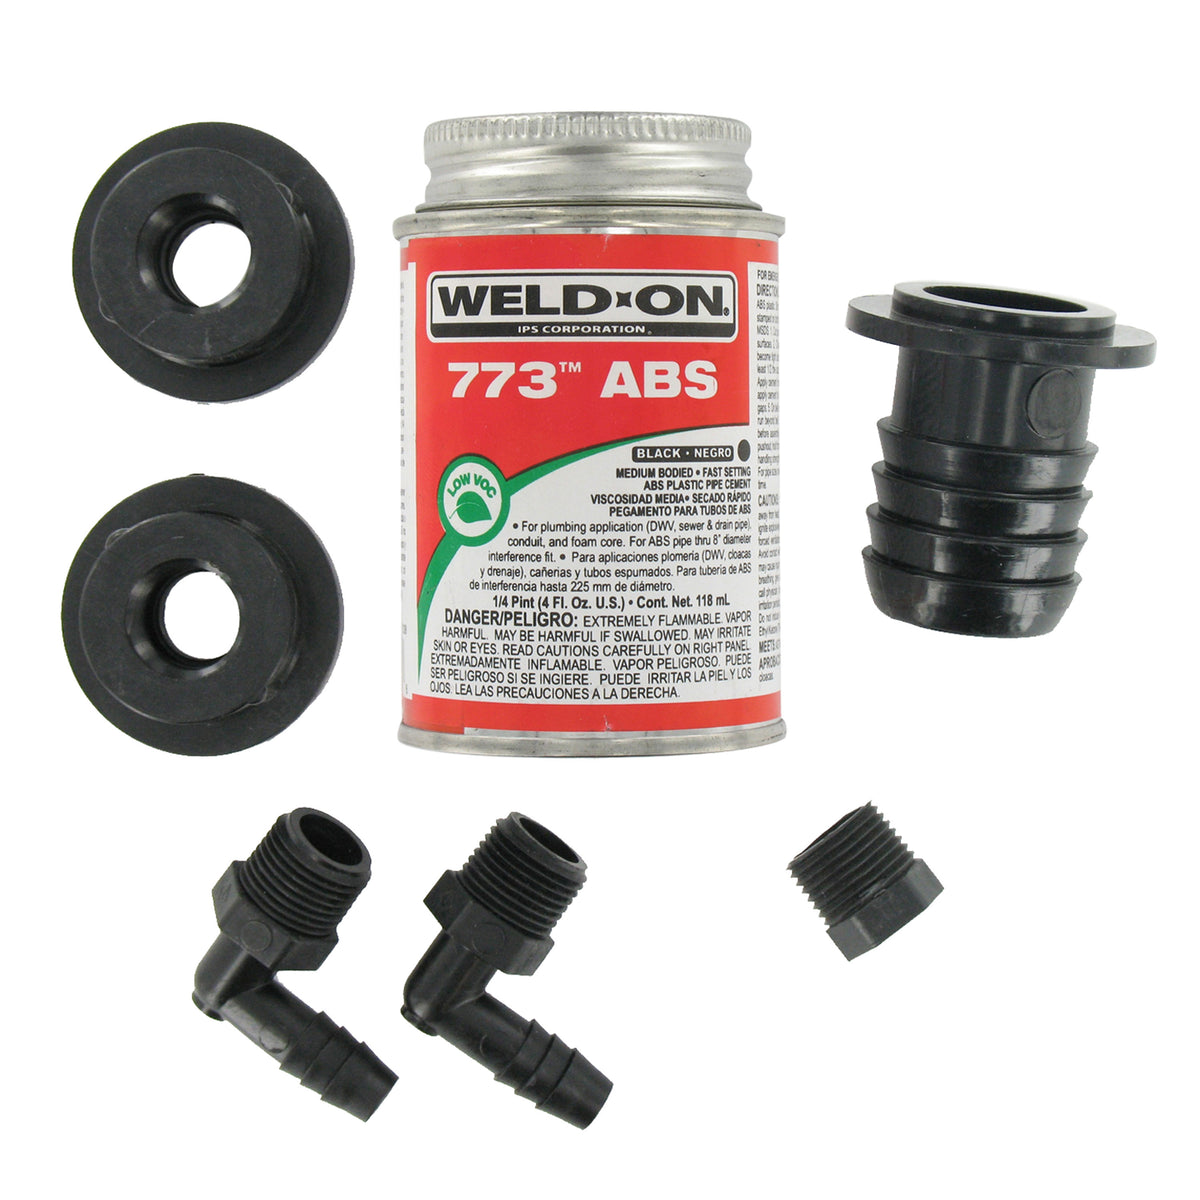 Valterra RK908 ABS Tank Fill Kit - Straight Barbed Fill with Cement